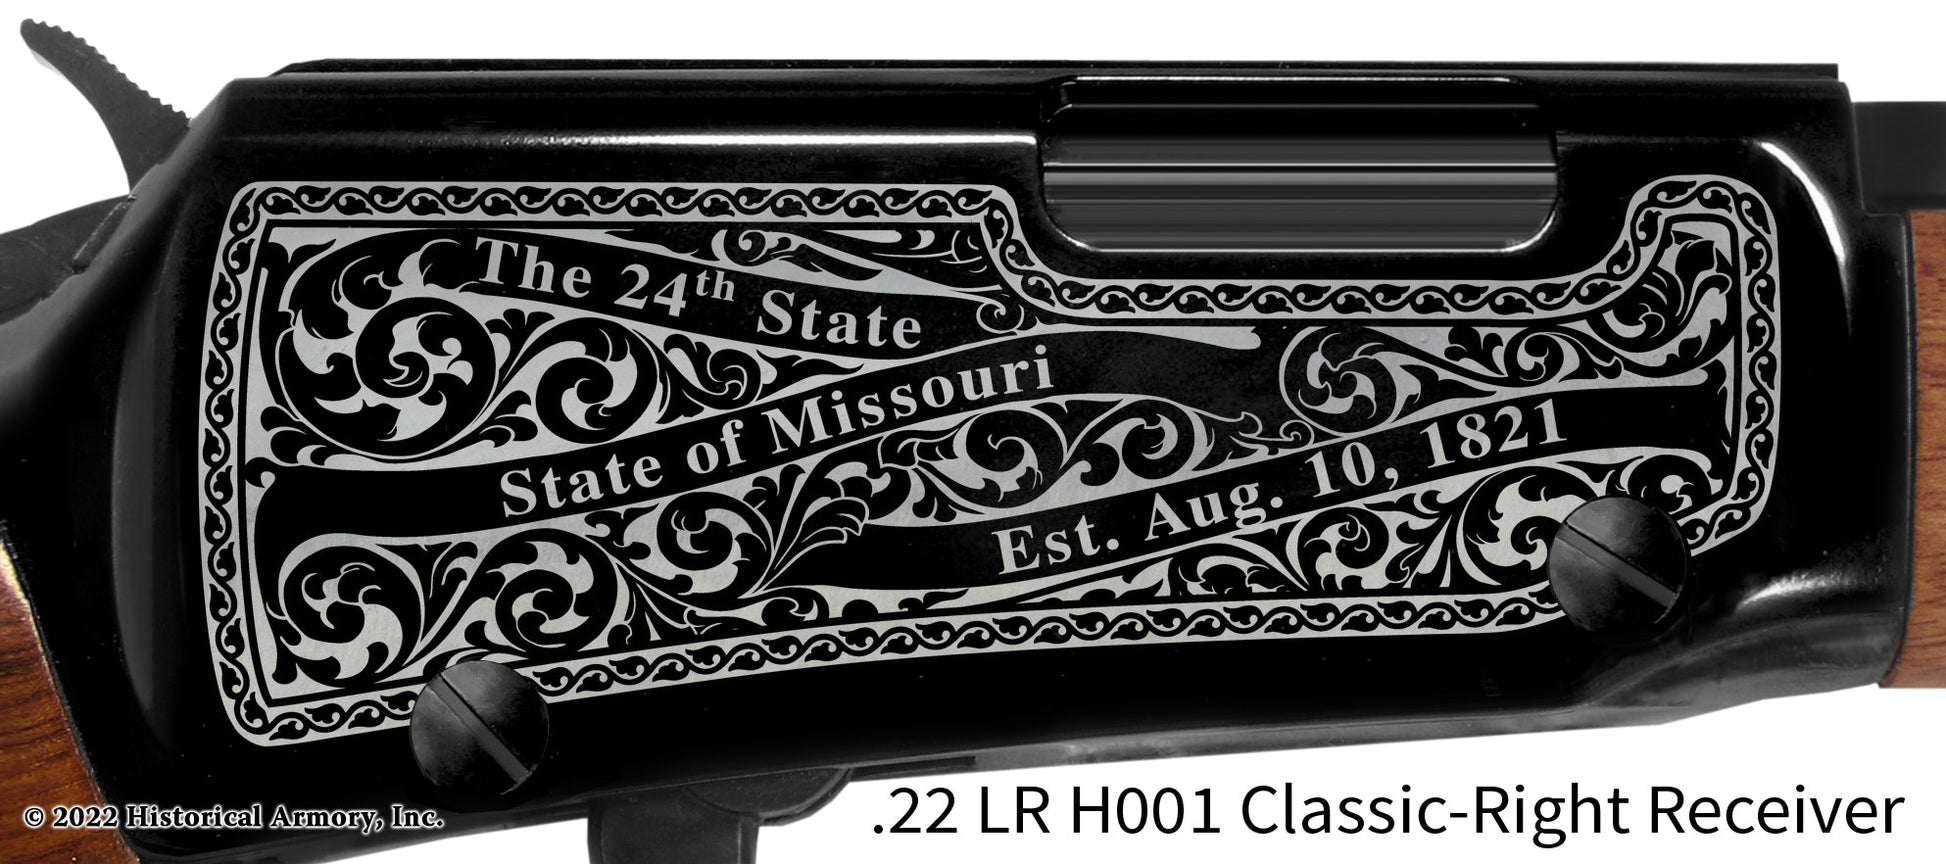 Caldwell County Missouri Engraved Henry H001 Rifle